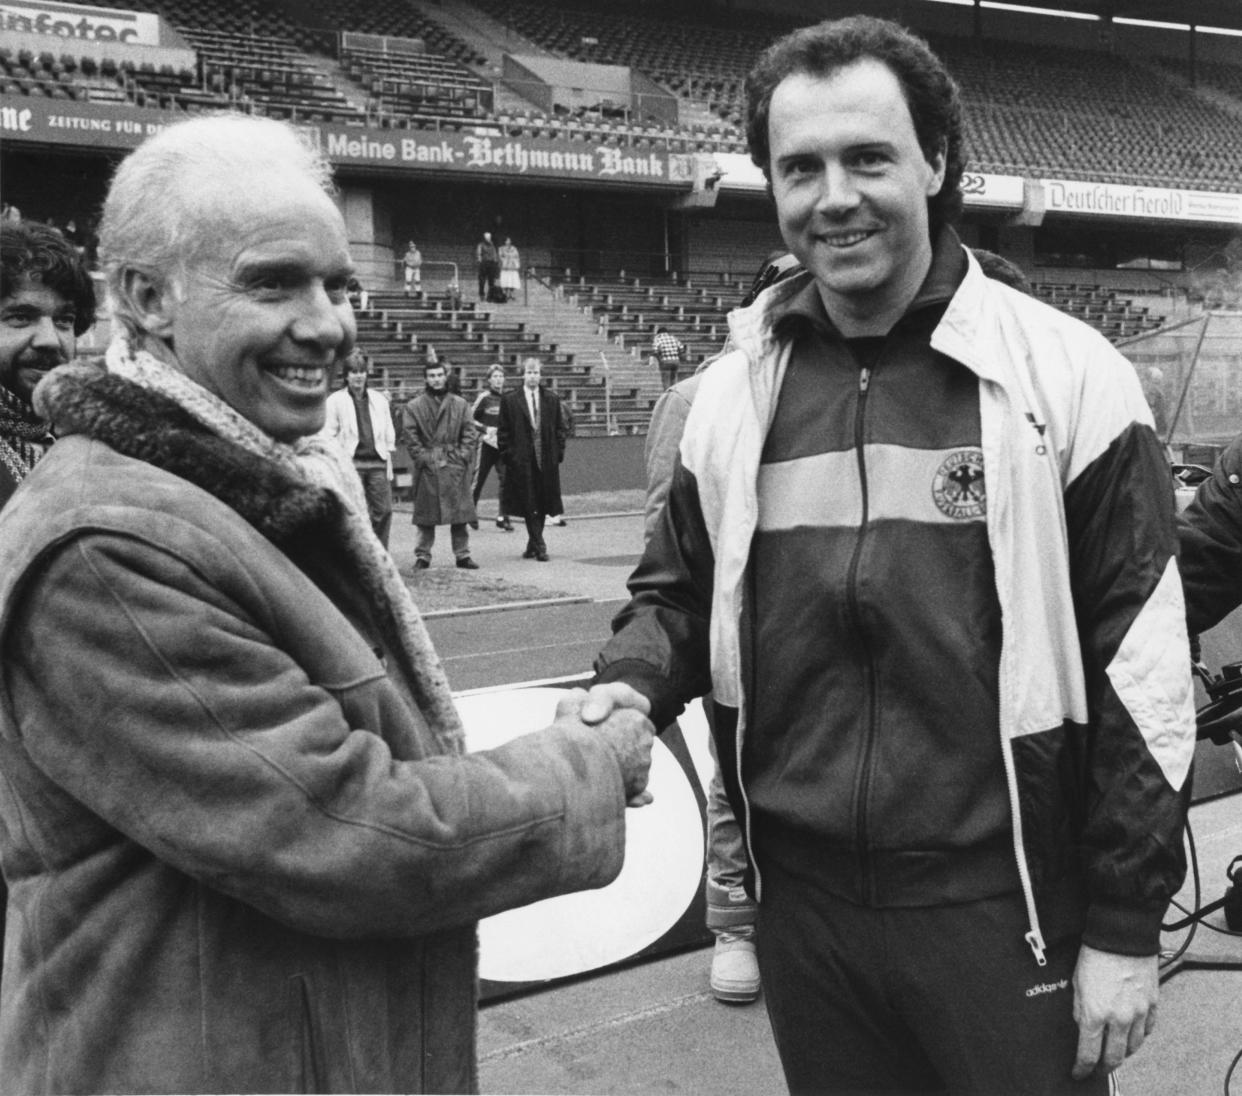 Mário Zagallo and Franz Beckenbauer shake hands ahead of a Brazil-Germany match in 1986. (Eilmes/Picture Alliance via Getty Images)